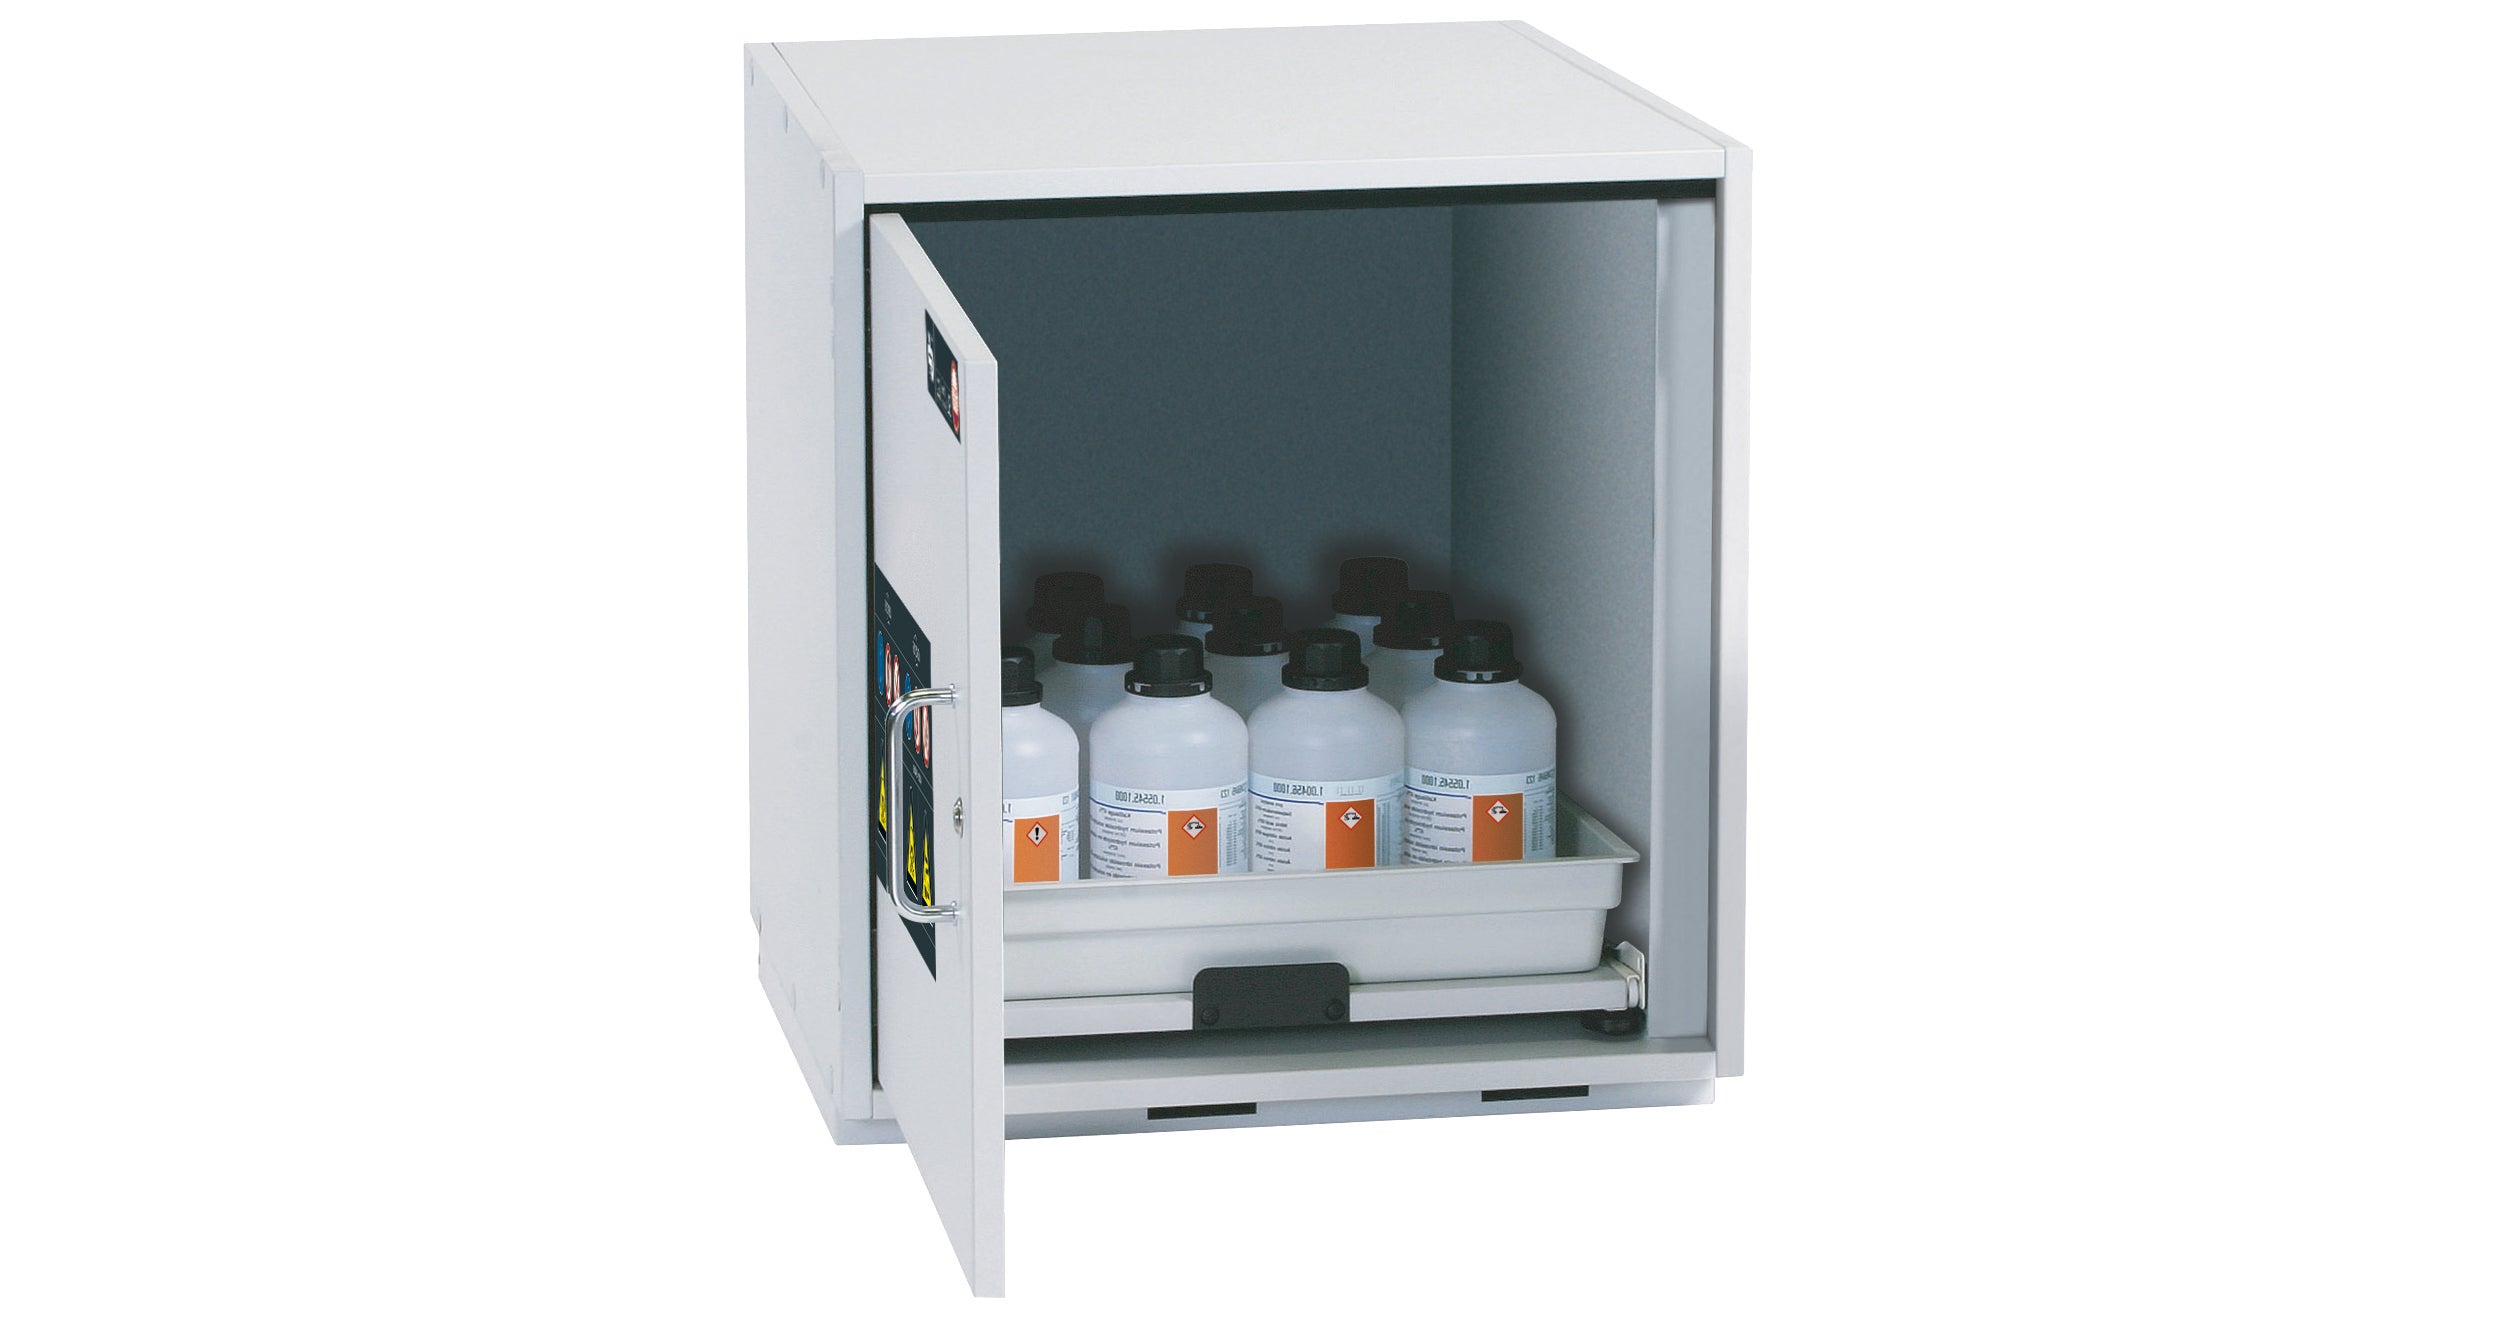 Acid and alkali base cabinet SL-CLASSIC-UB model SL.060.059.UB.T in light gray with 1x AbZ shelf pull-out (FP plate/polypropylene)